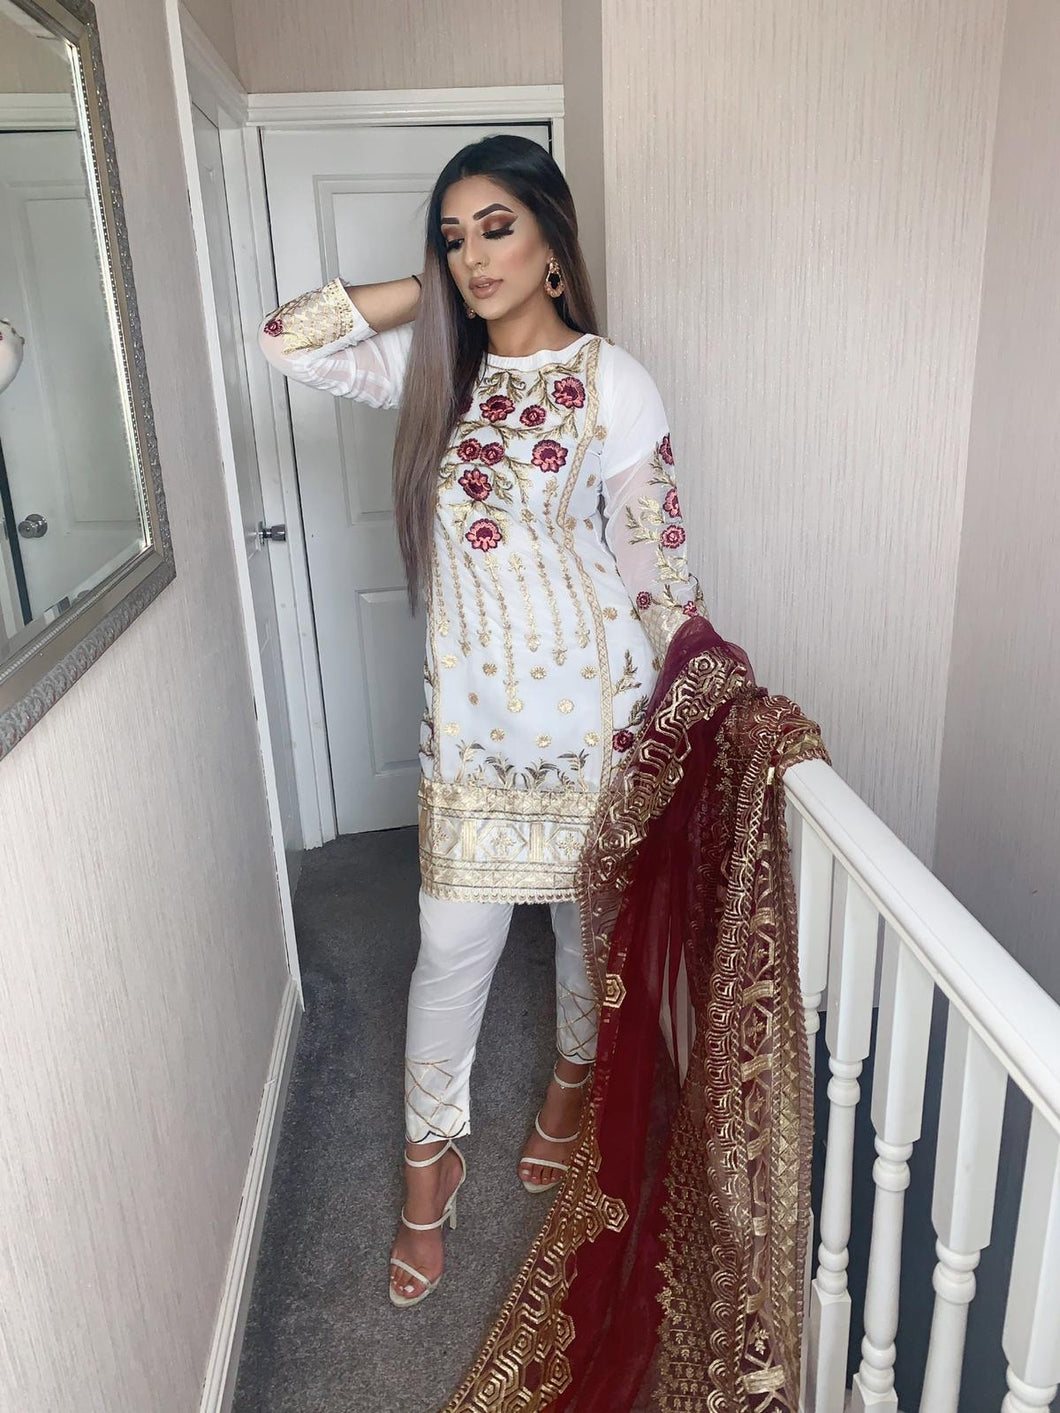 3pc White chiffon with Gold Embroidery Shalwar Kameez with Organza Dupatta Stitched Suit Ready to wear